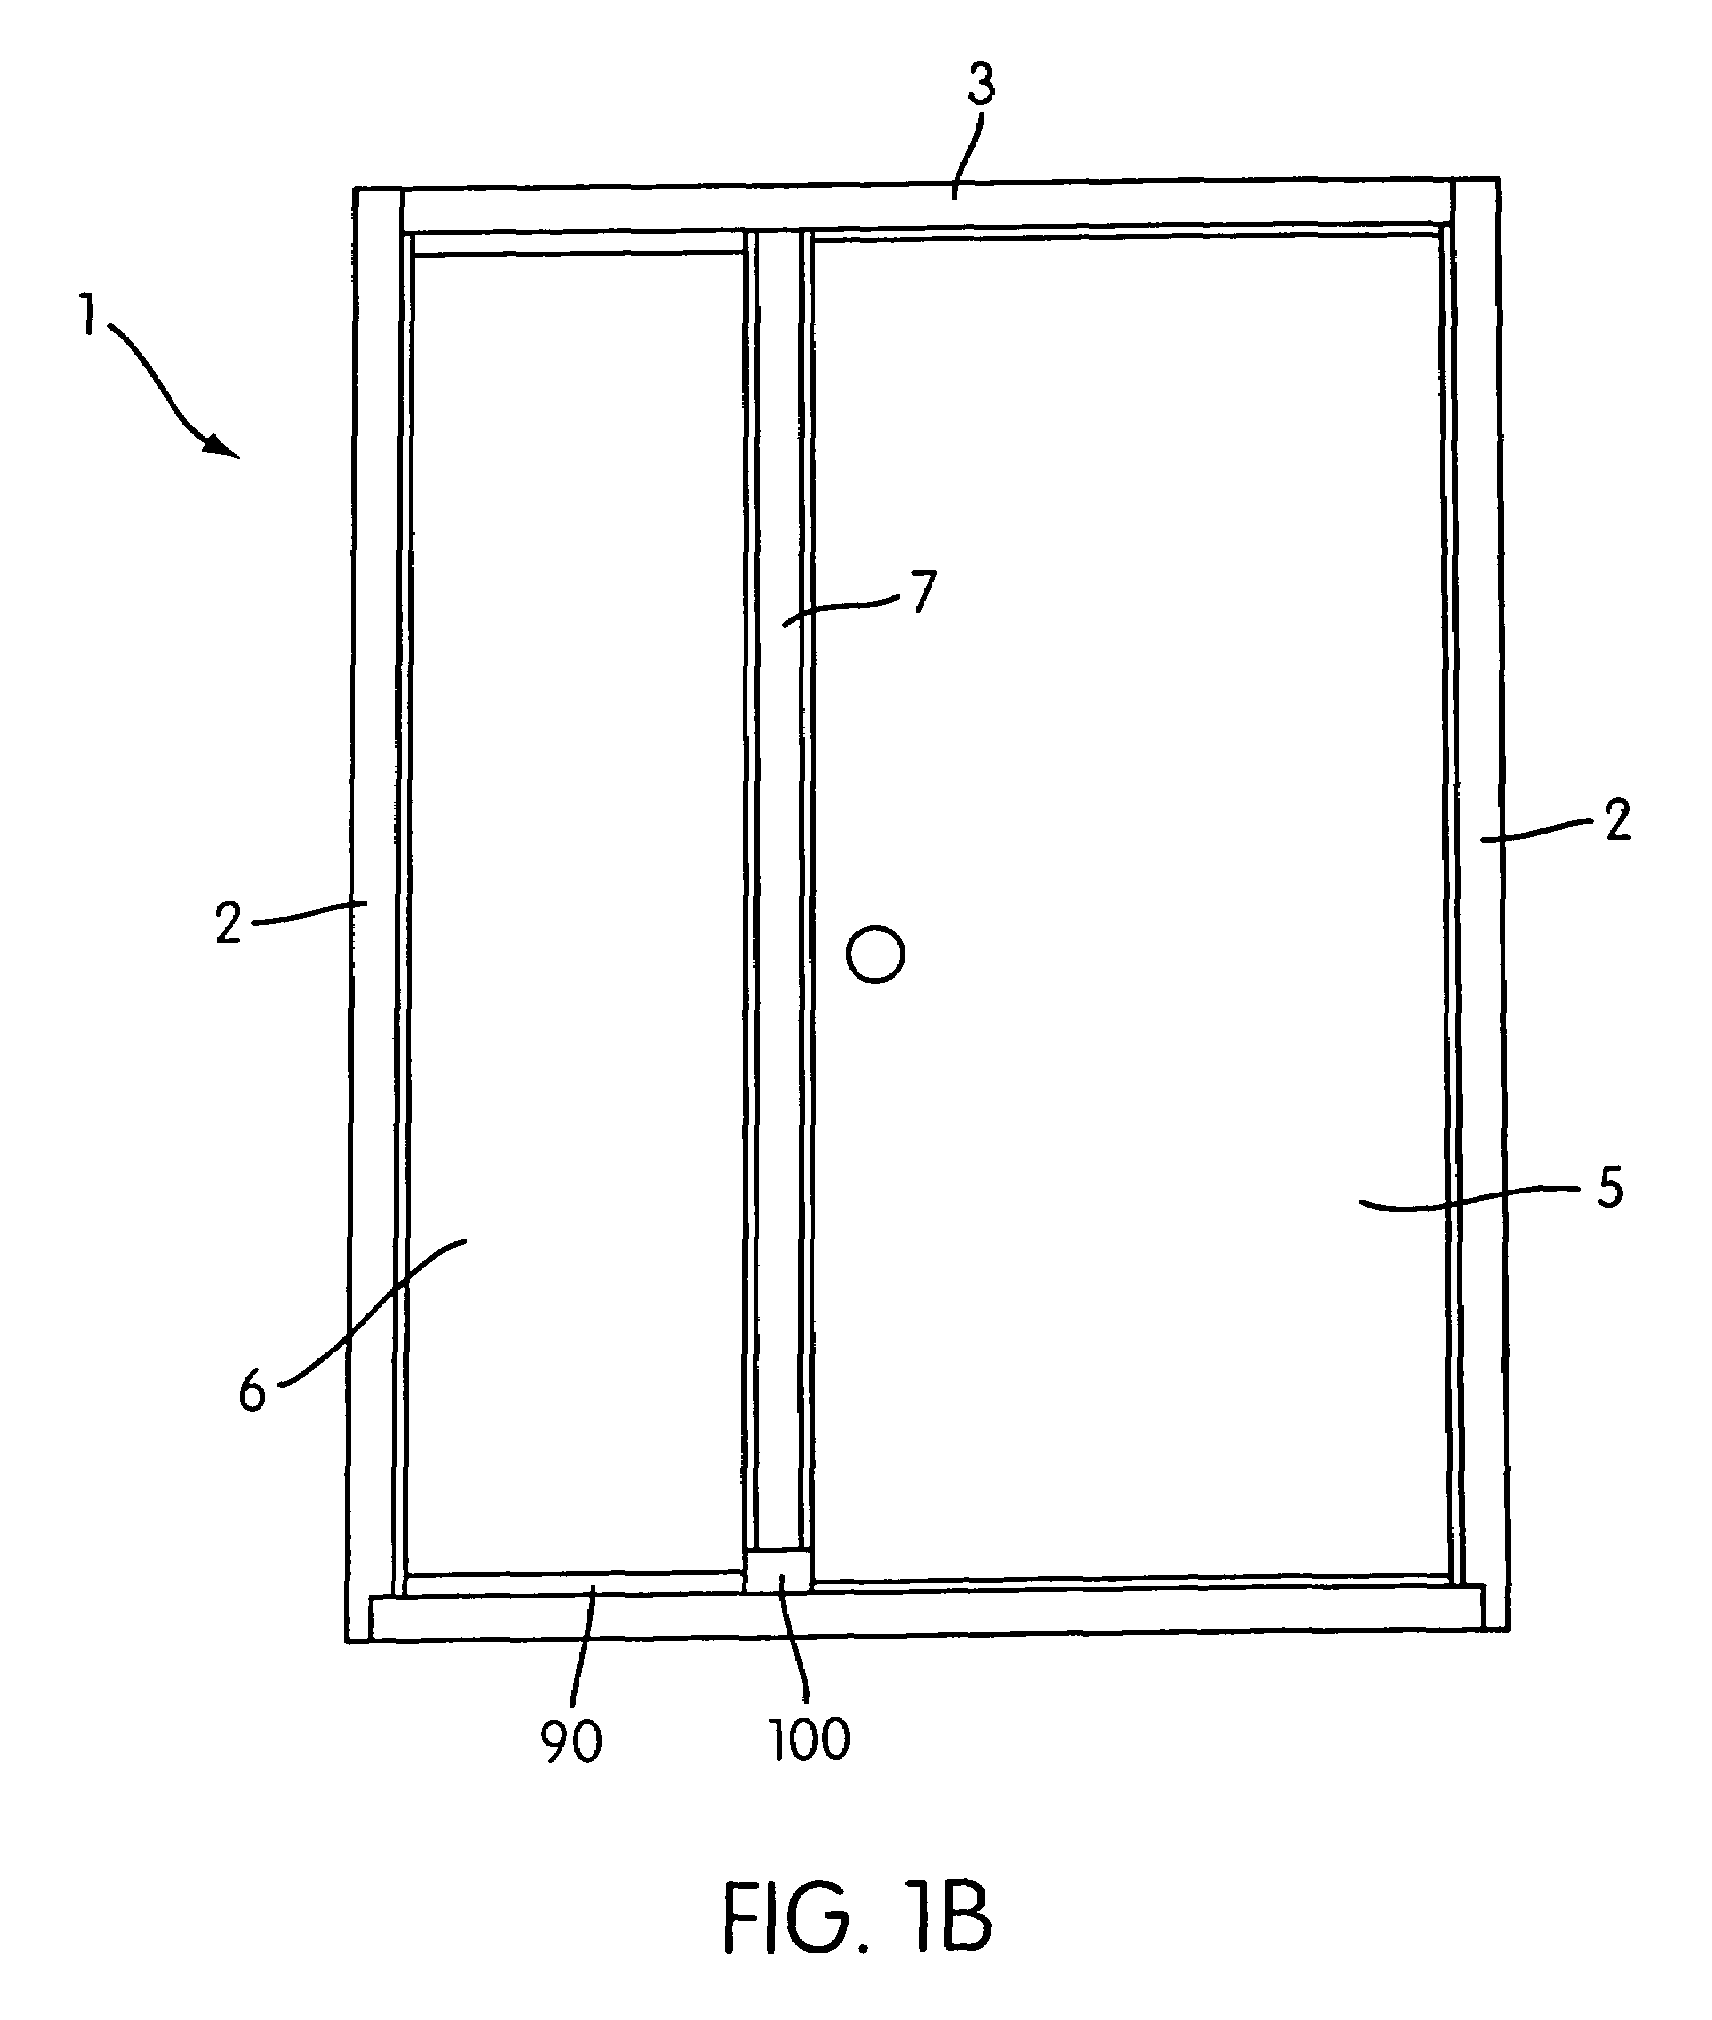 Adjustable rail assembly for exterior door still assembly and components for the same